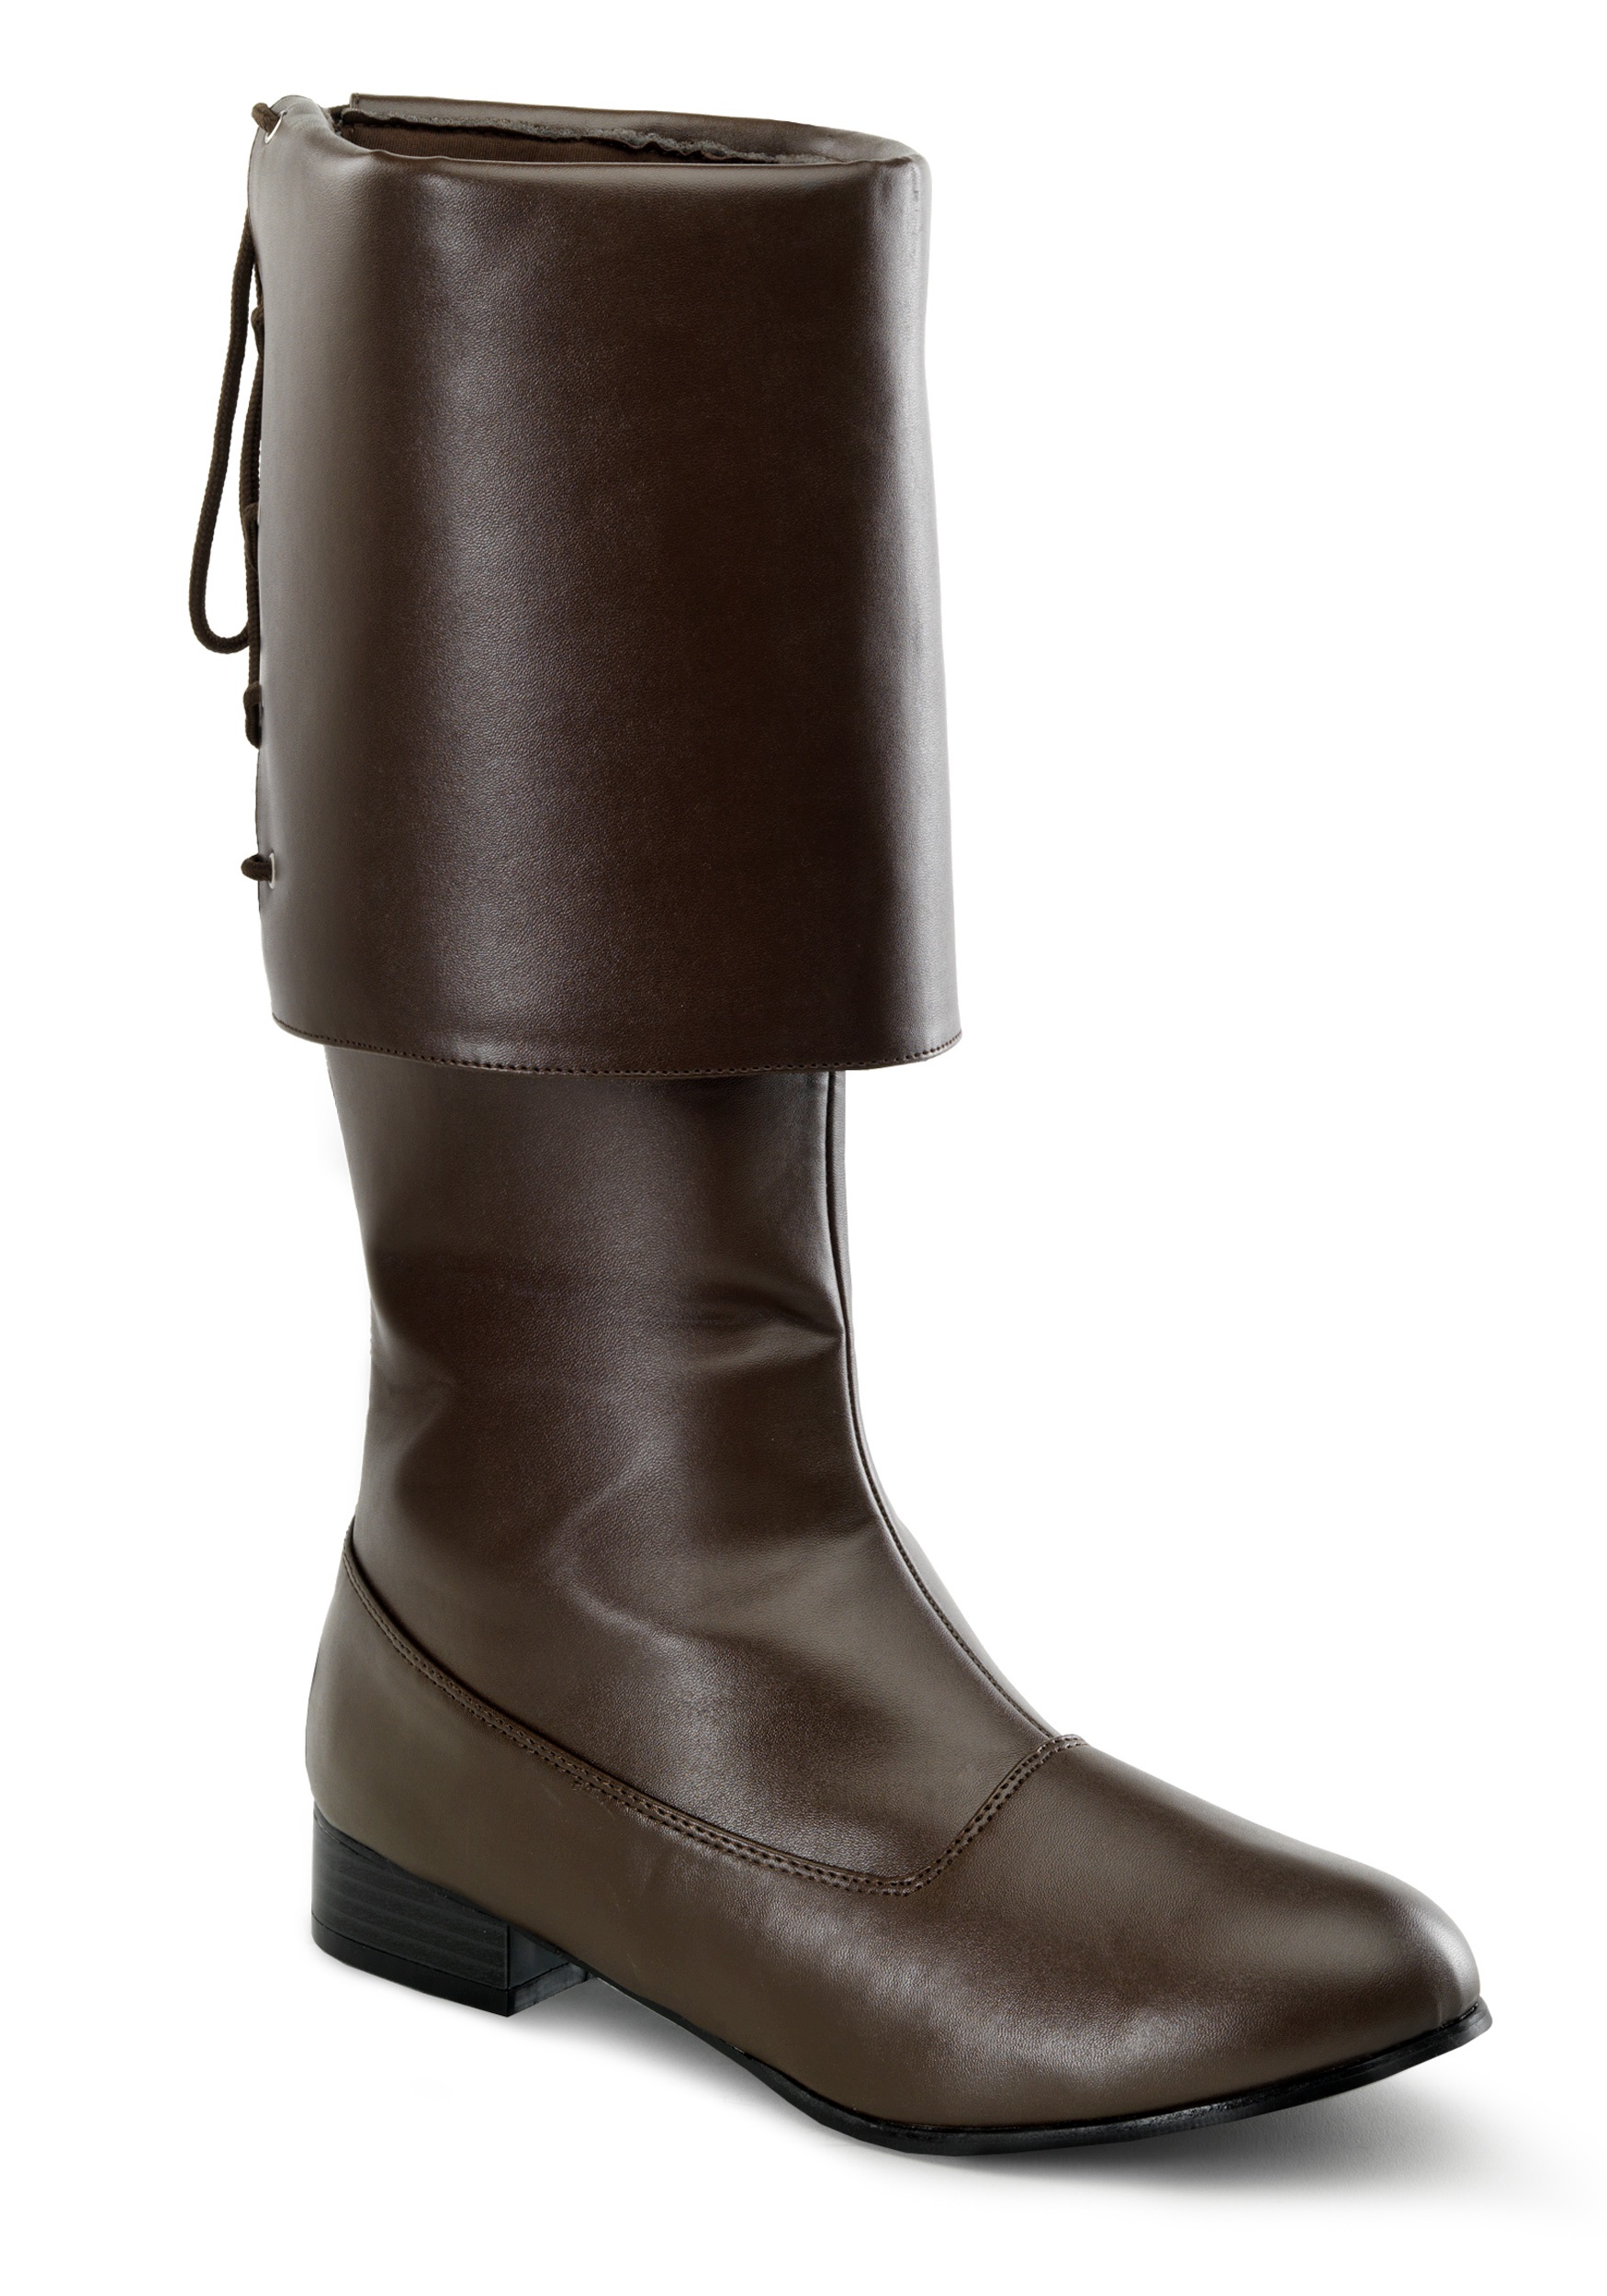 Adults Costume Brown Buccaneer Boots